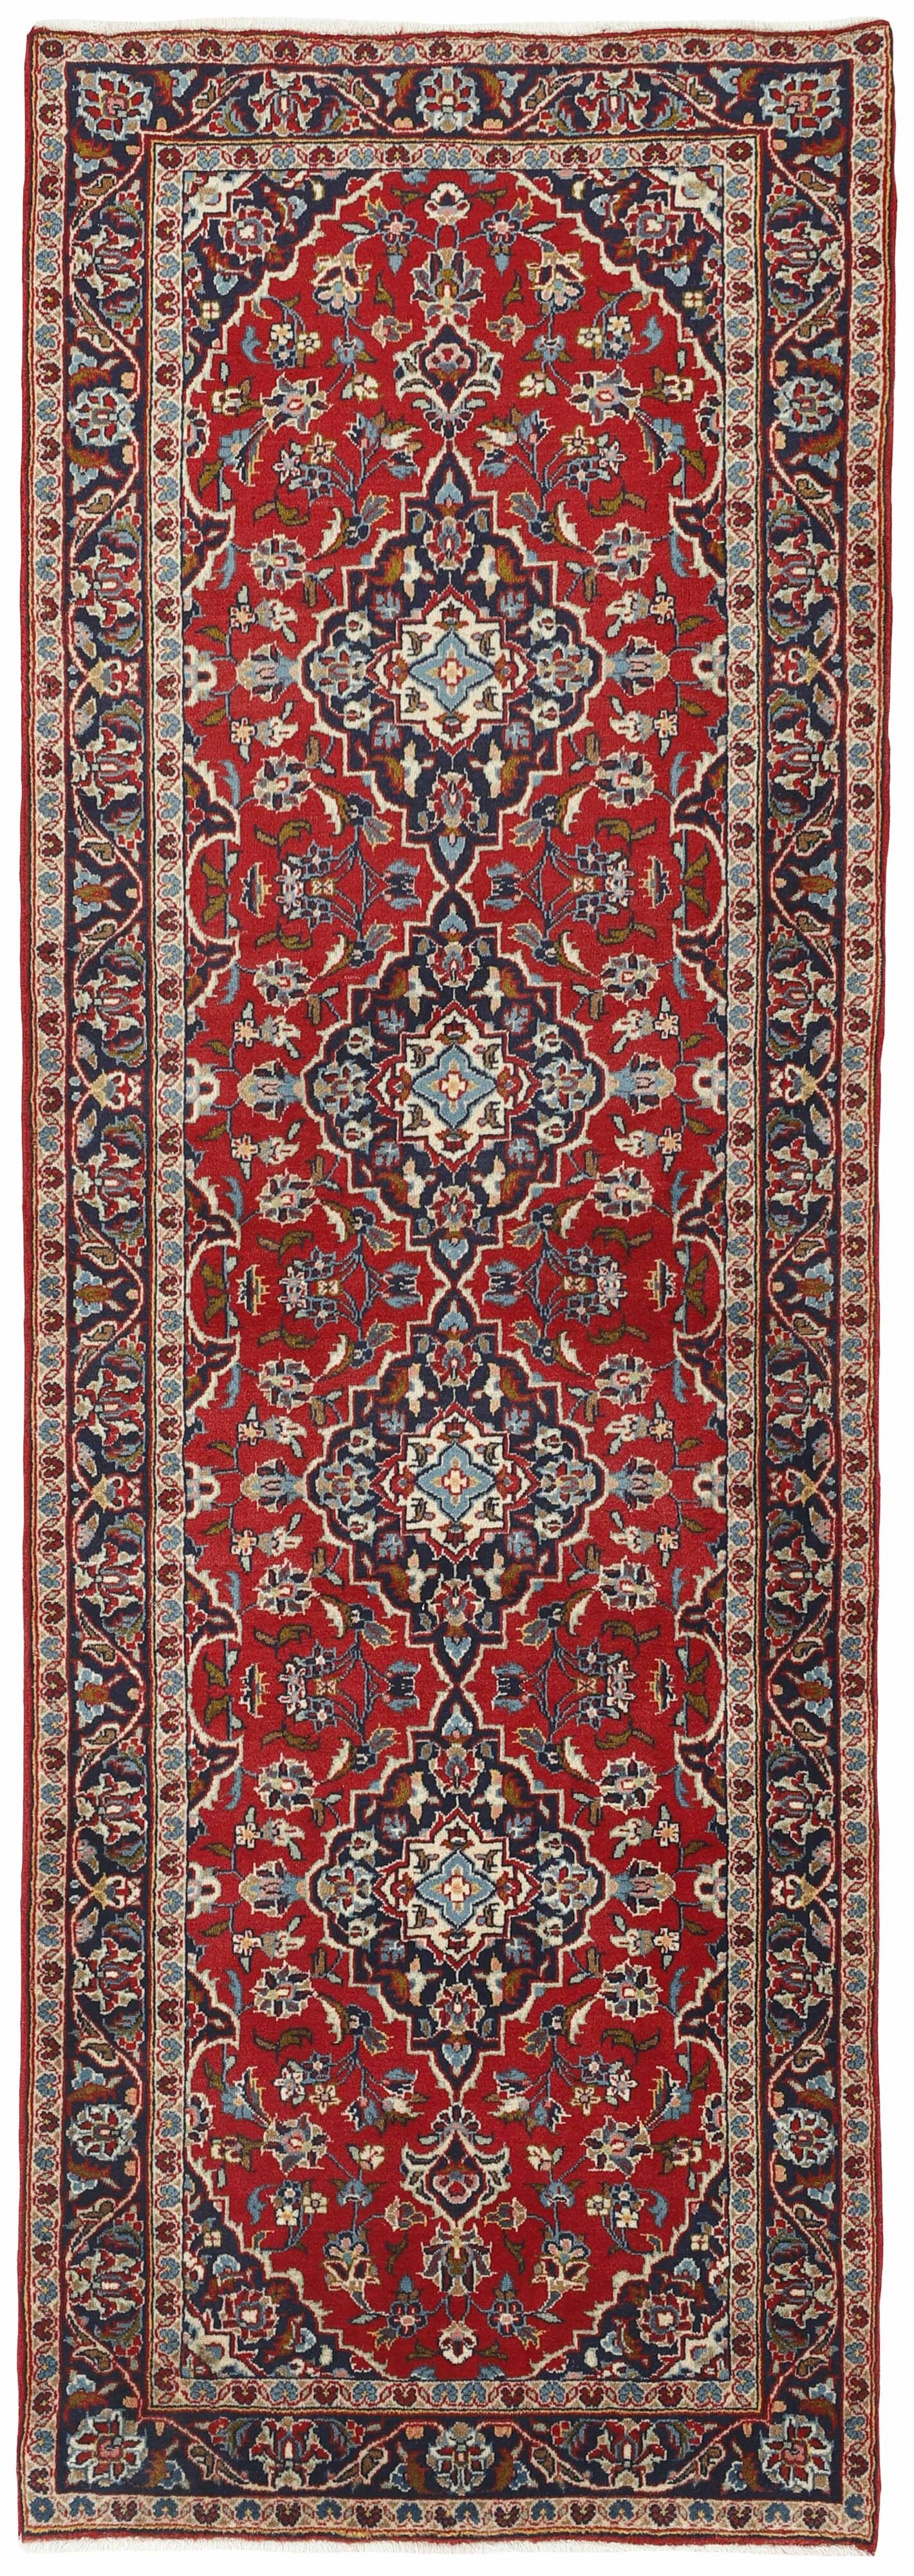 Authentic persian runner with traditional floral design in red and blue